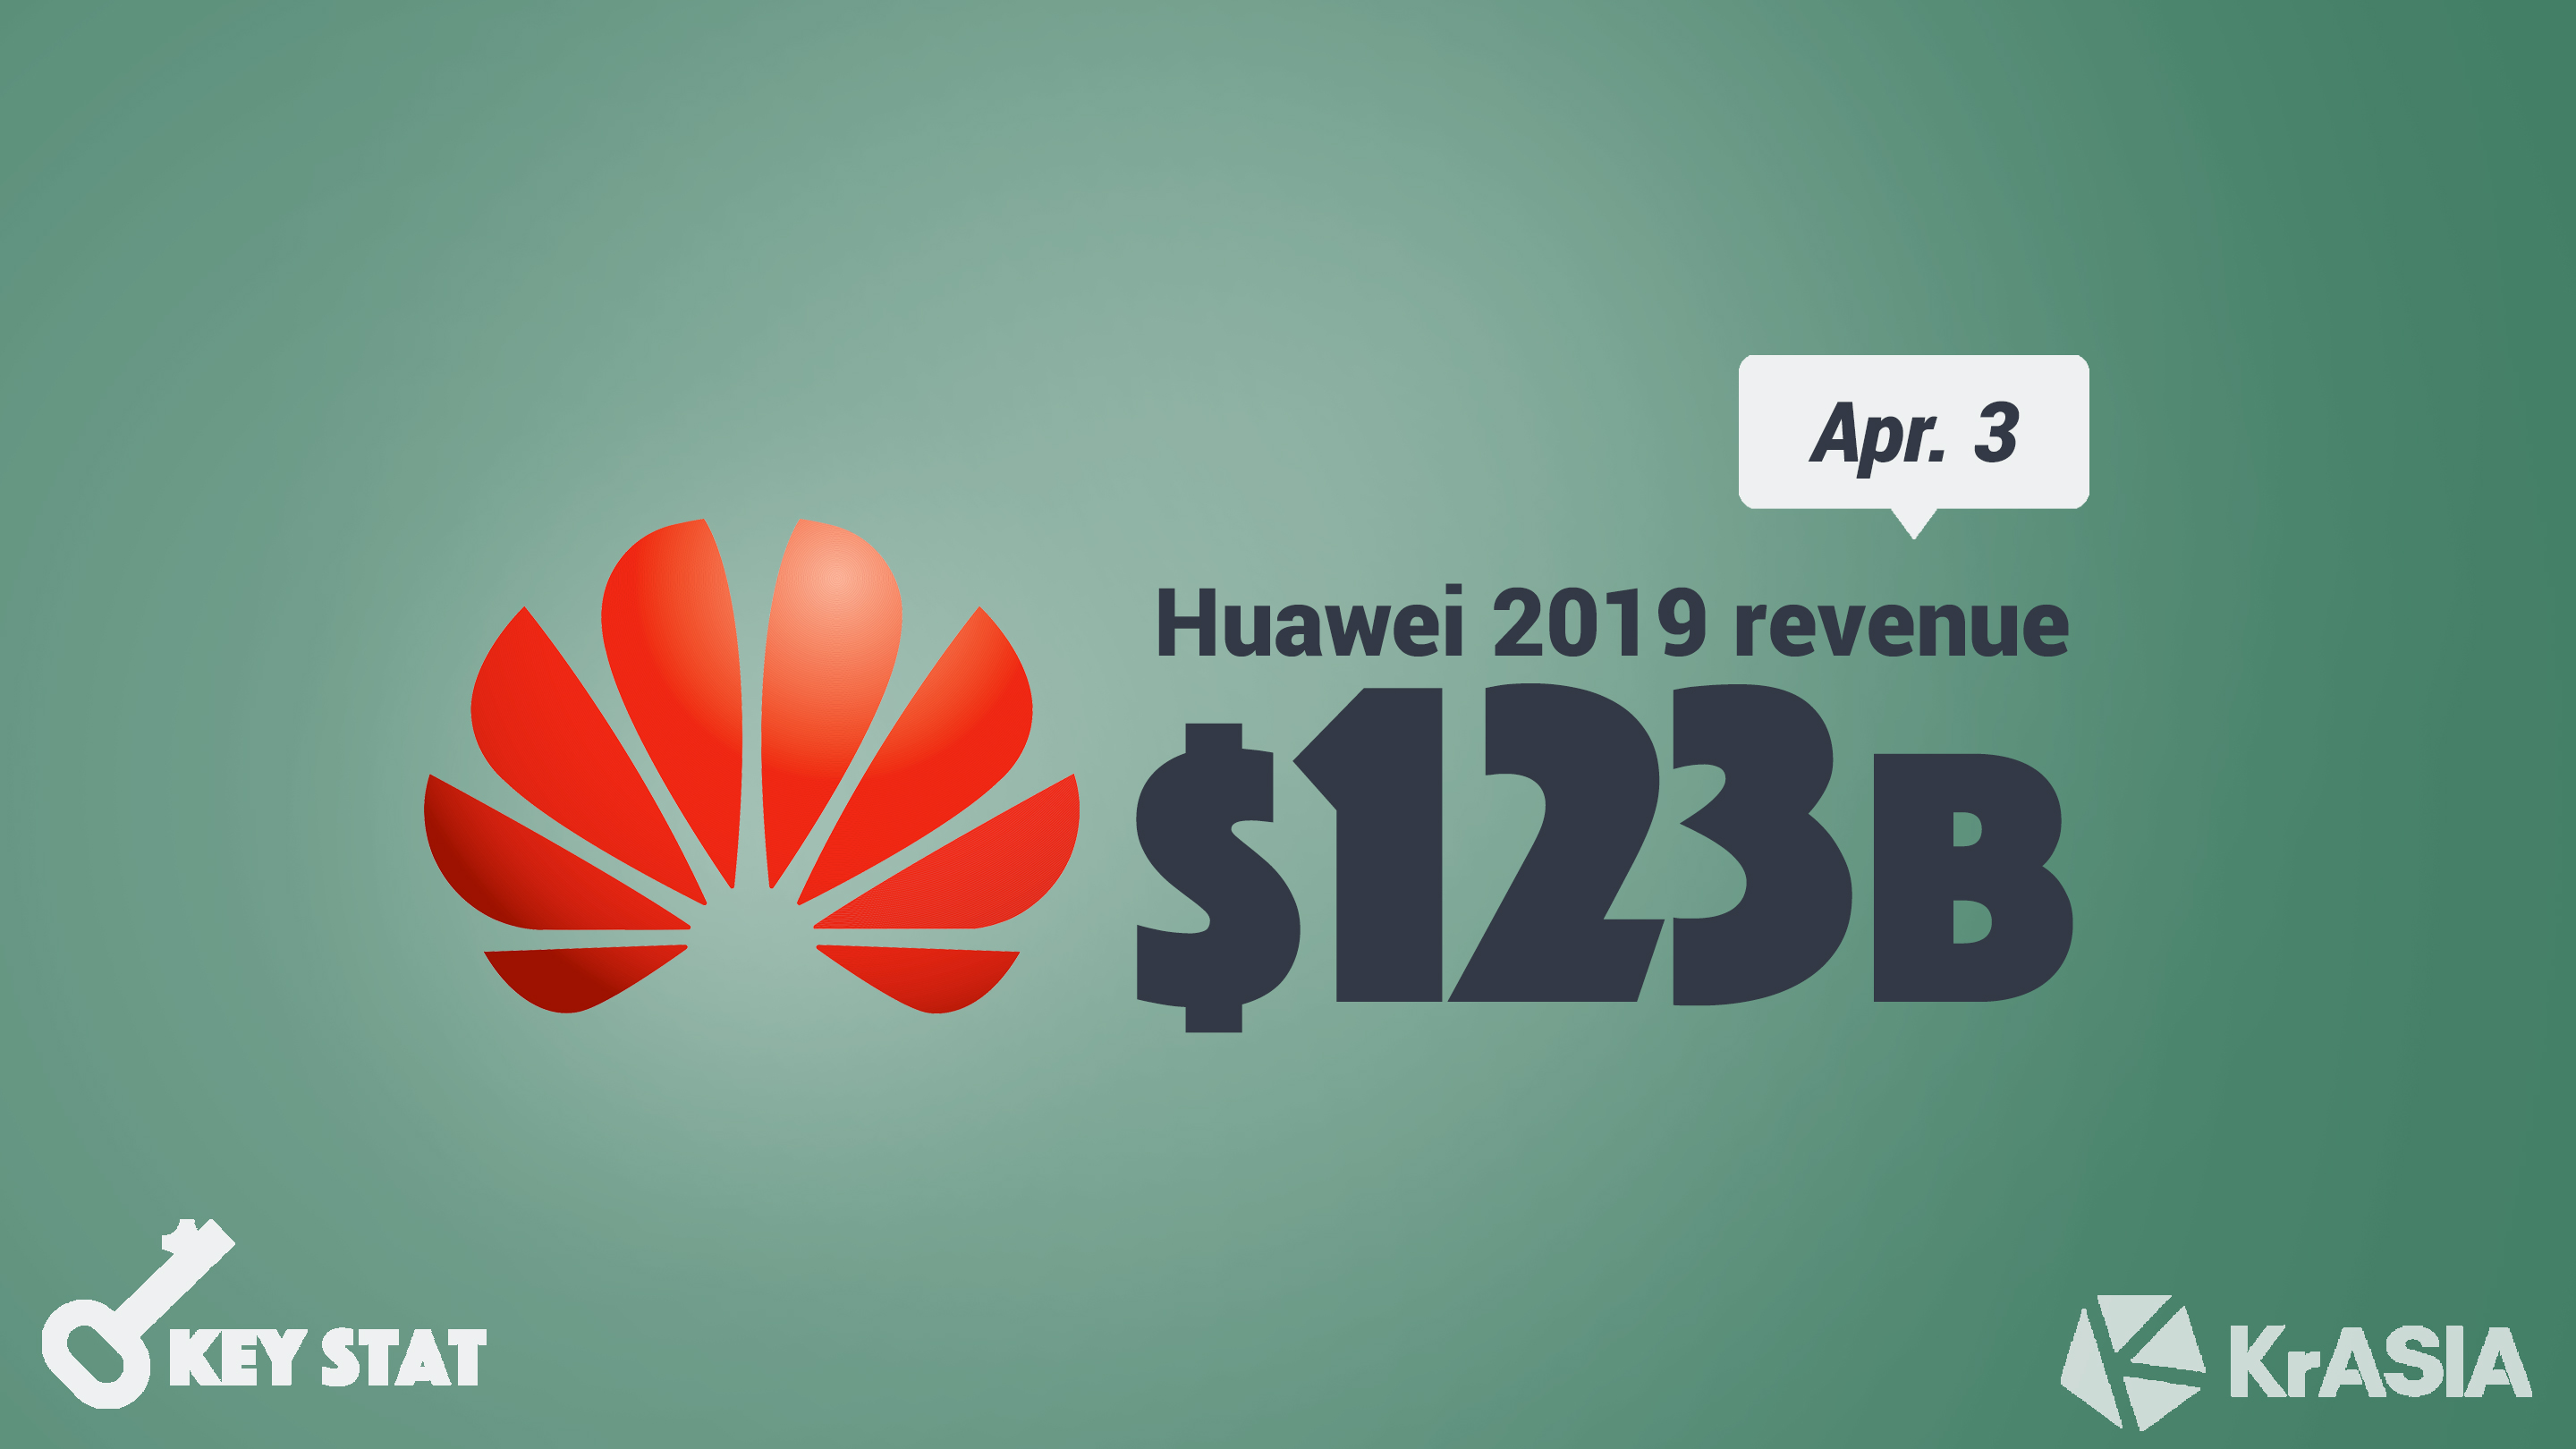 KEY STAT | 2020 may prove to be an even greater challenge, says Huawei